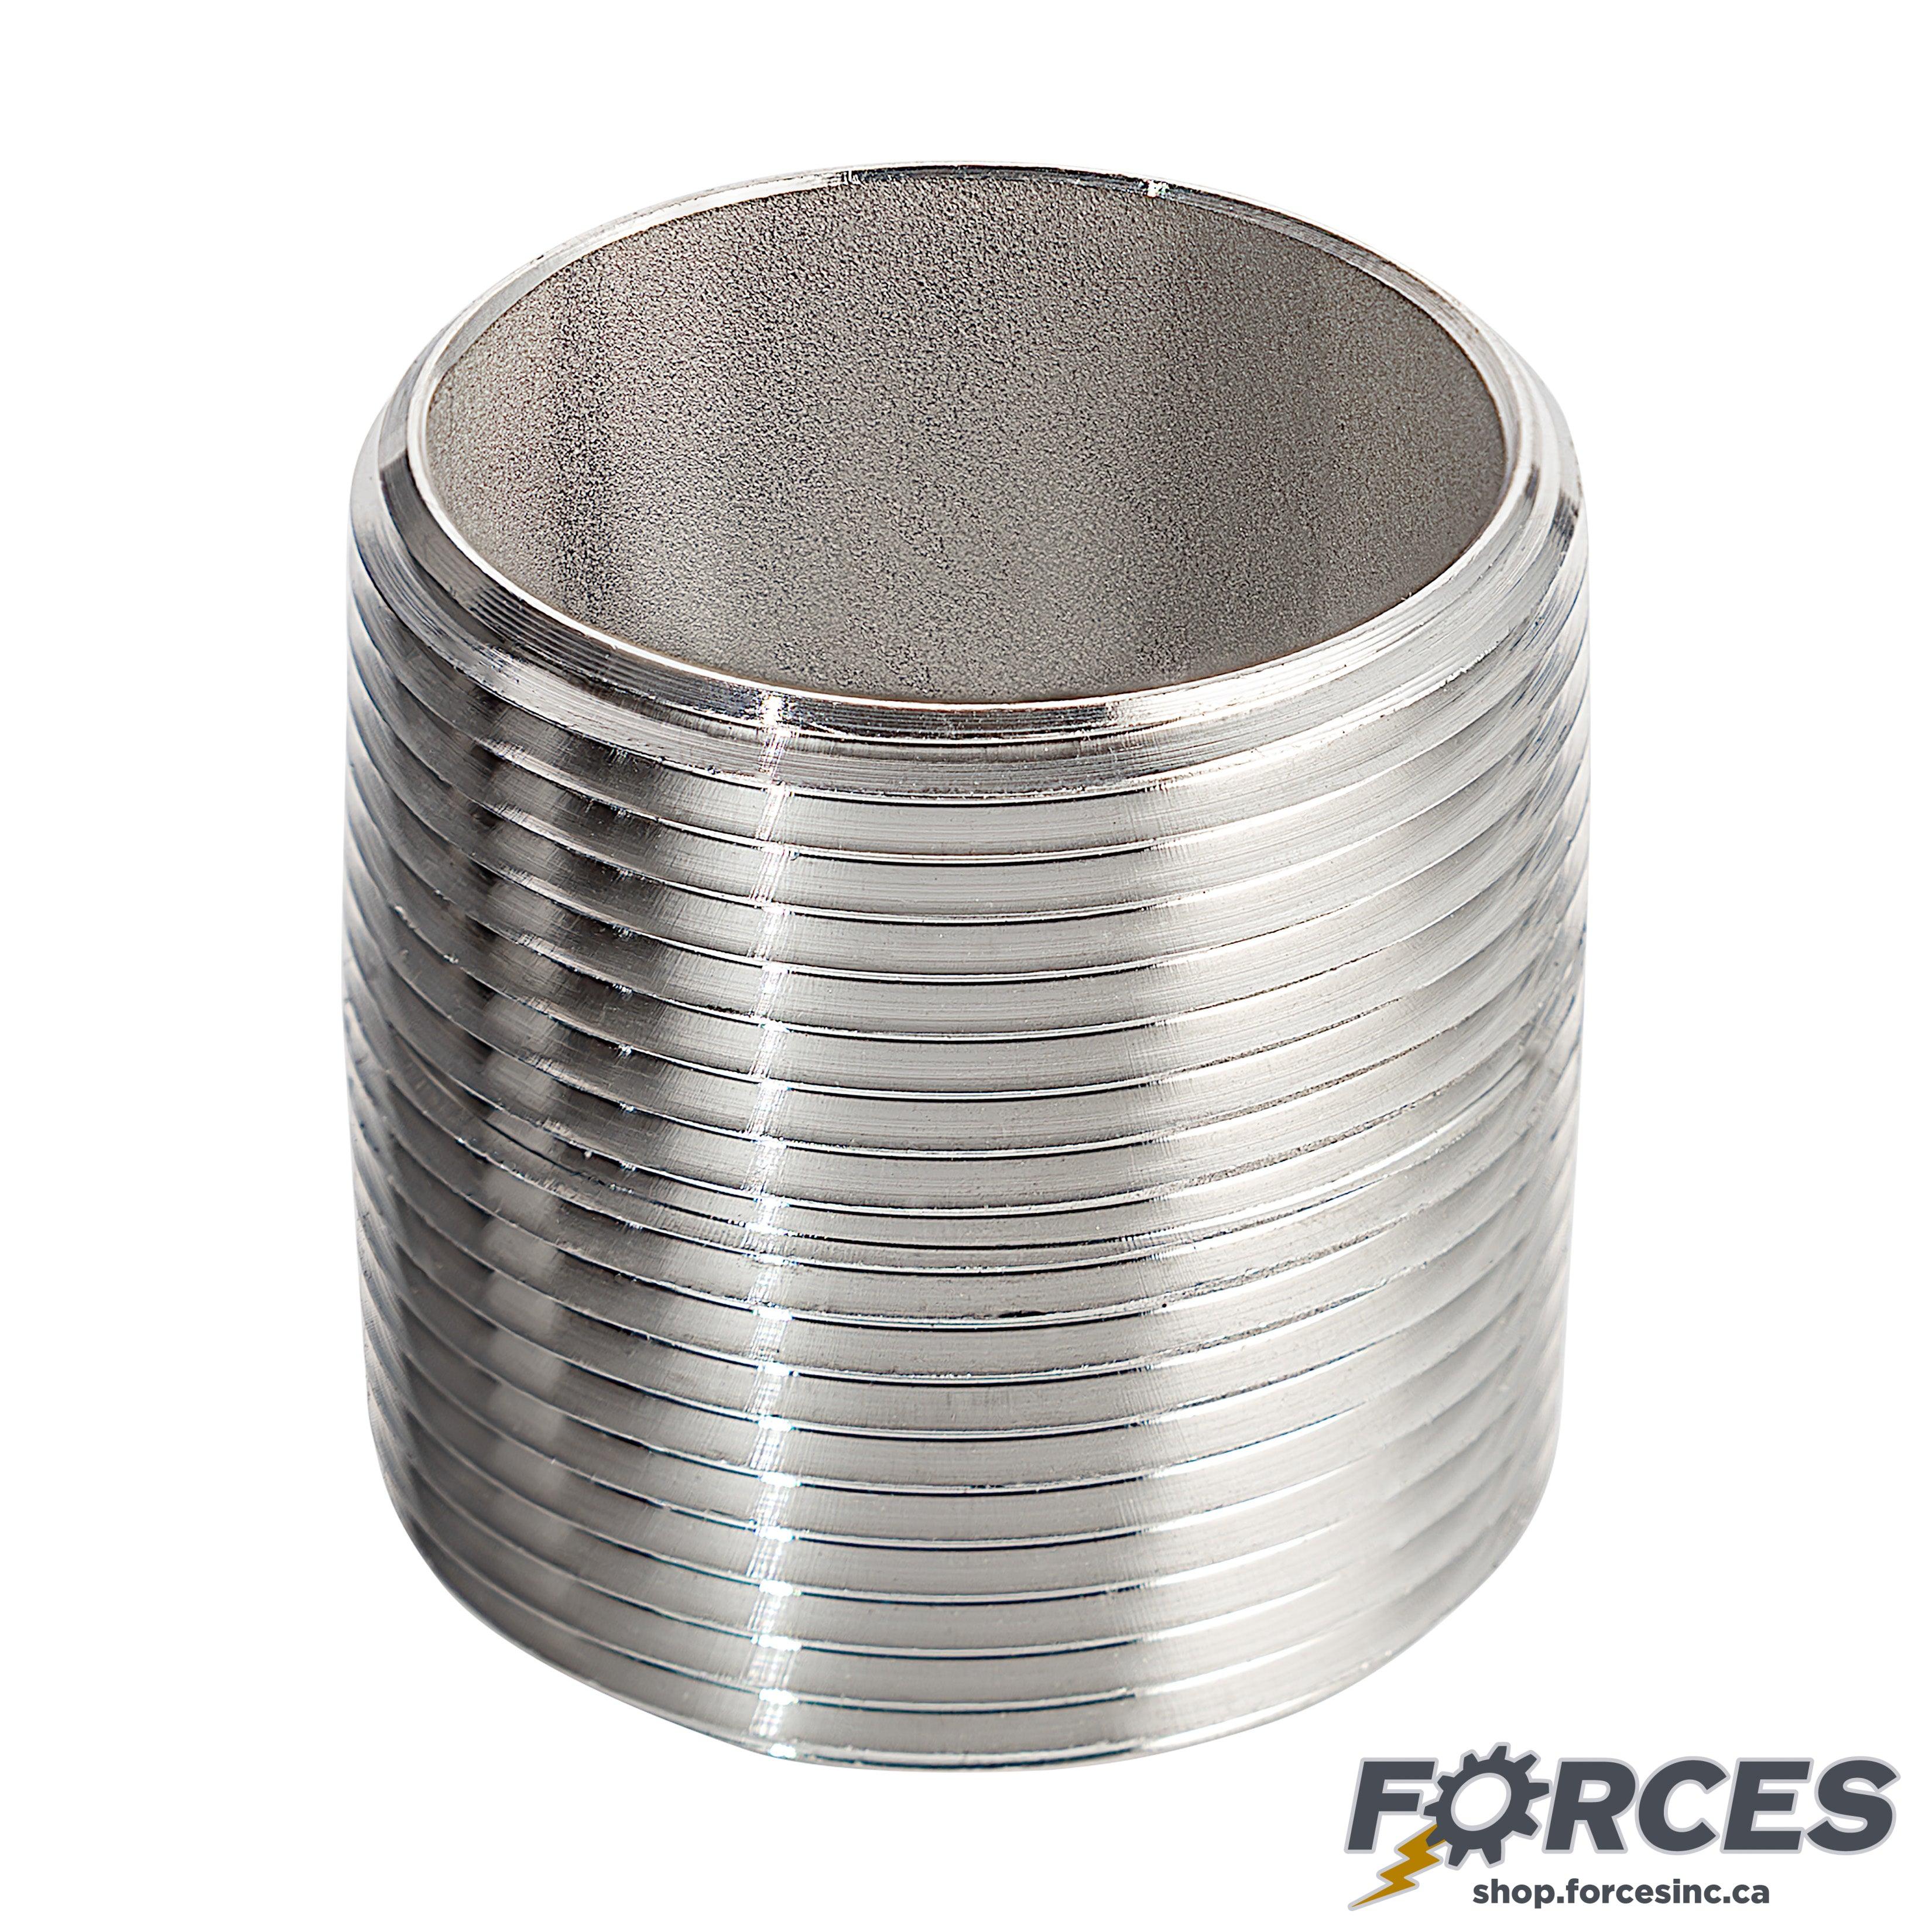 1/8" Closed Nipple - Stainless Steel 316 - Forces Inc